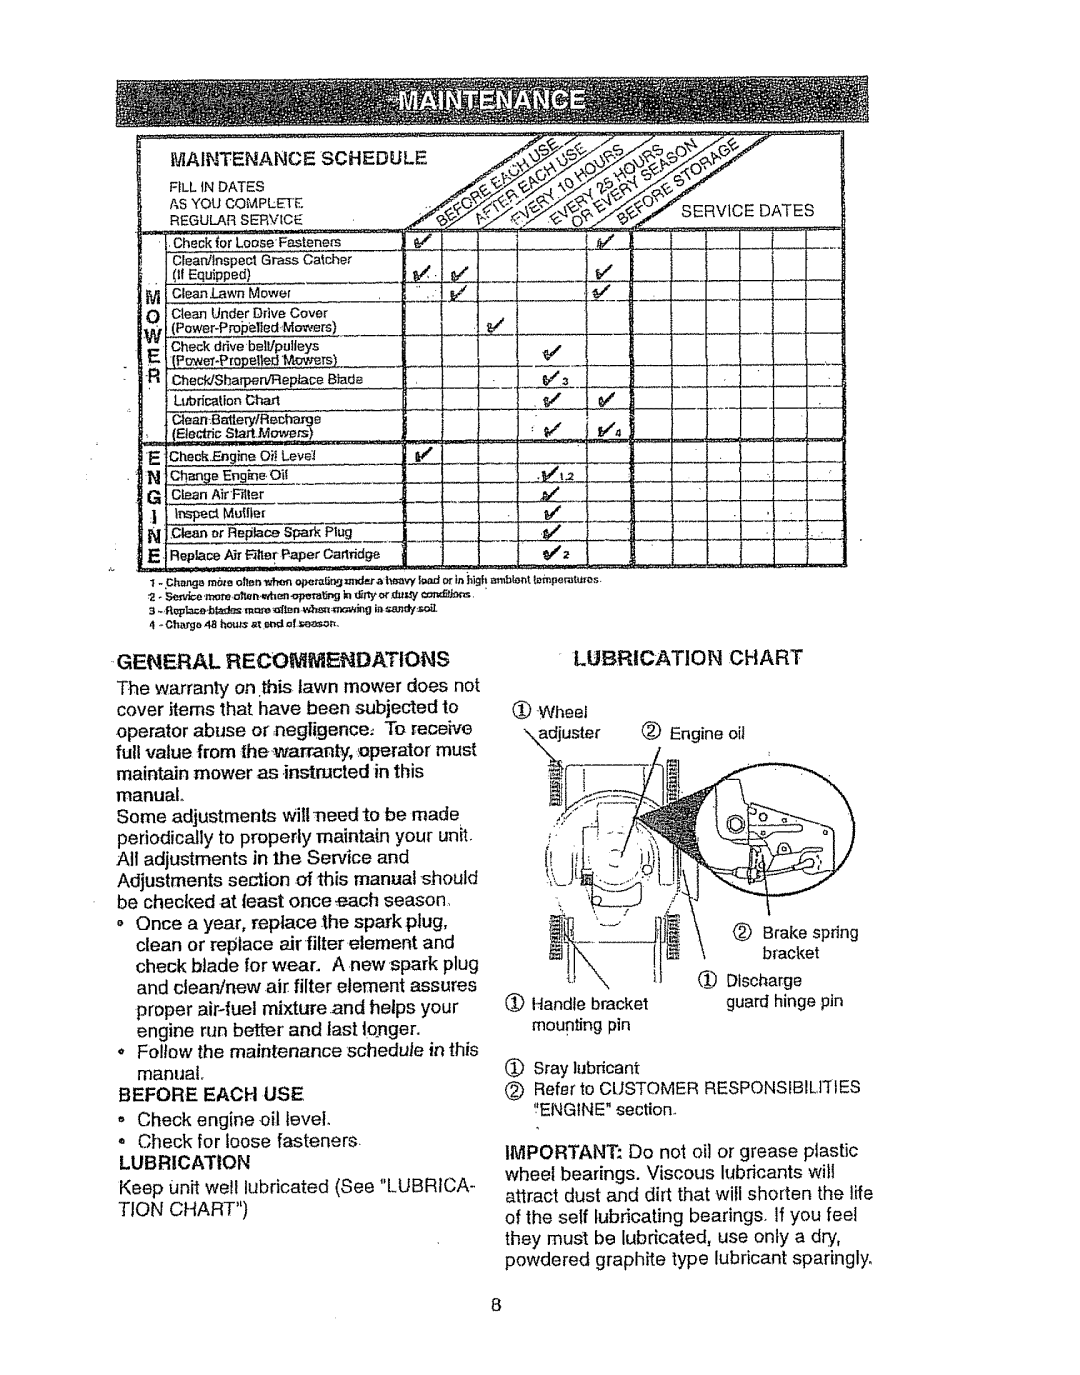 Sears 917.387023 owner manual Maintenanceschedule, Lubriication Chart, General Recommendations, Before Each Use 